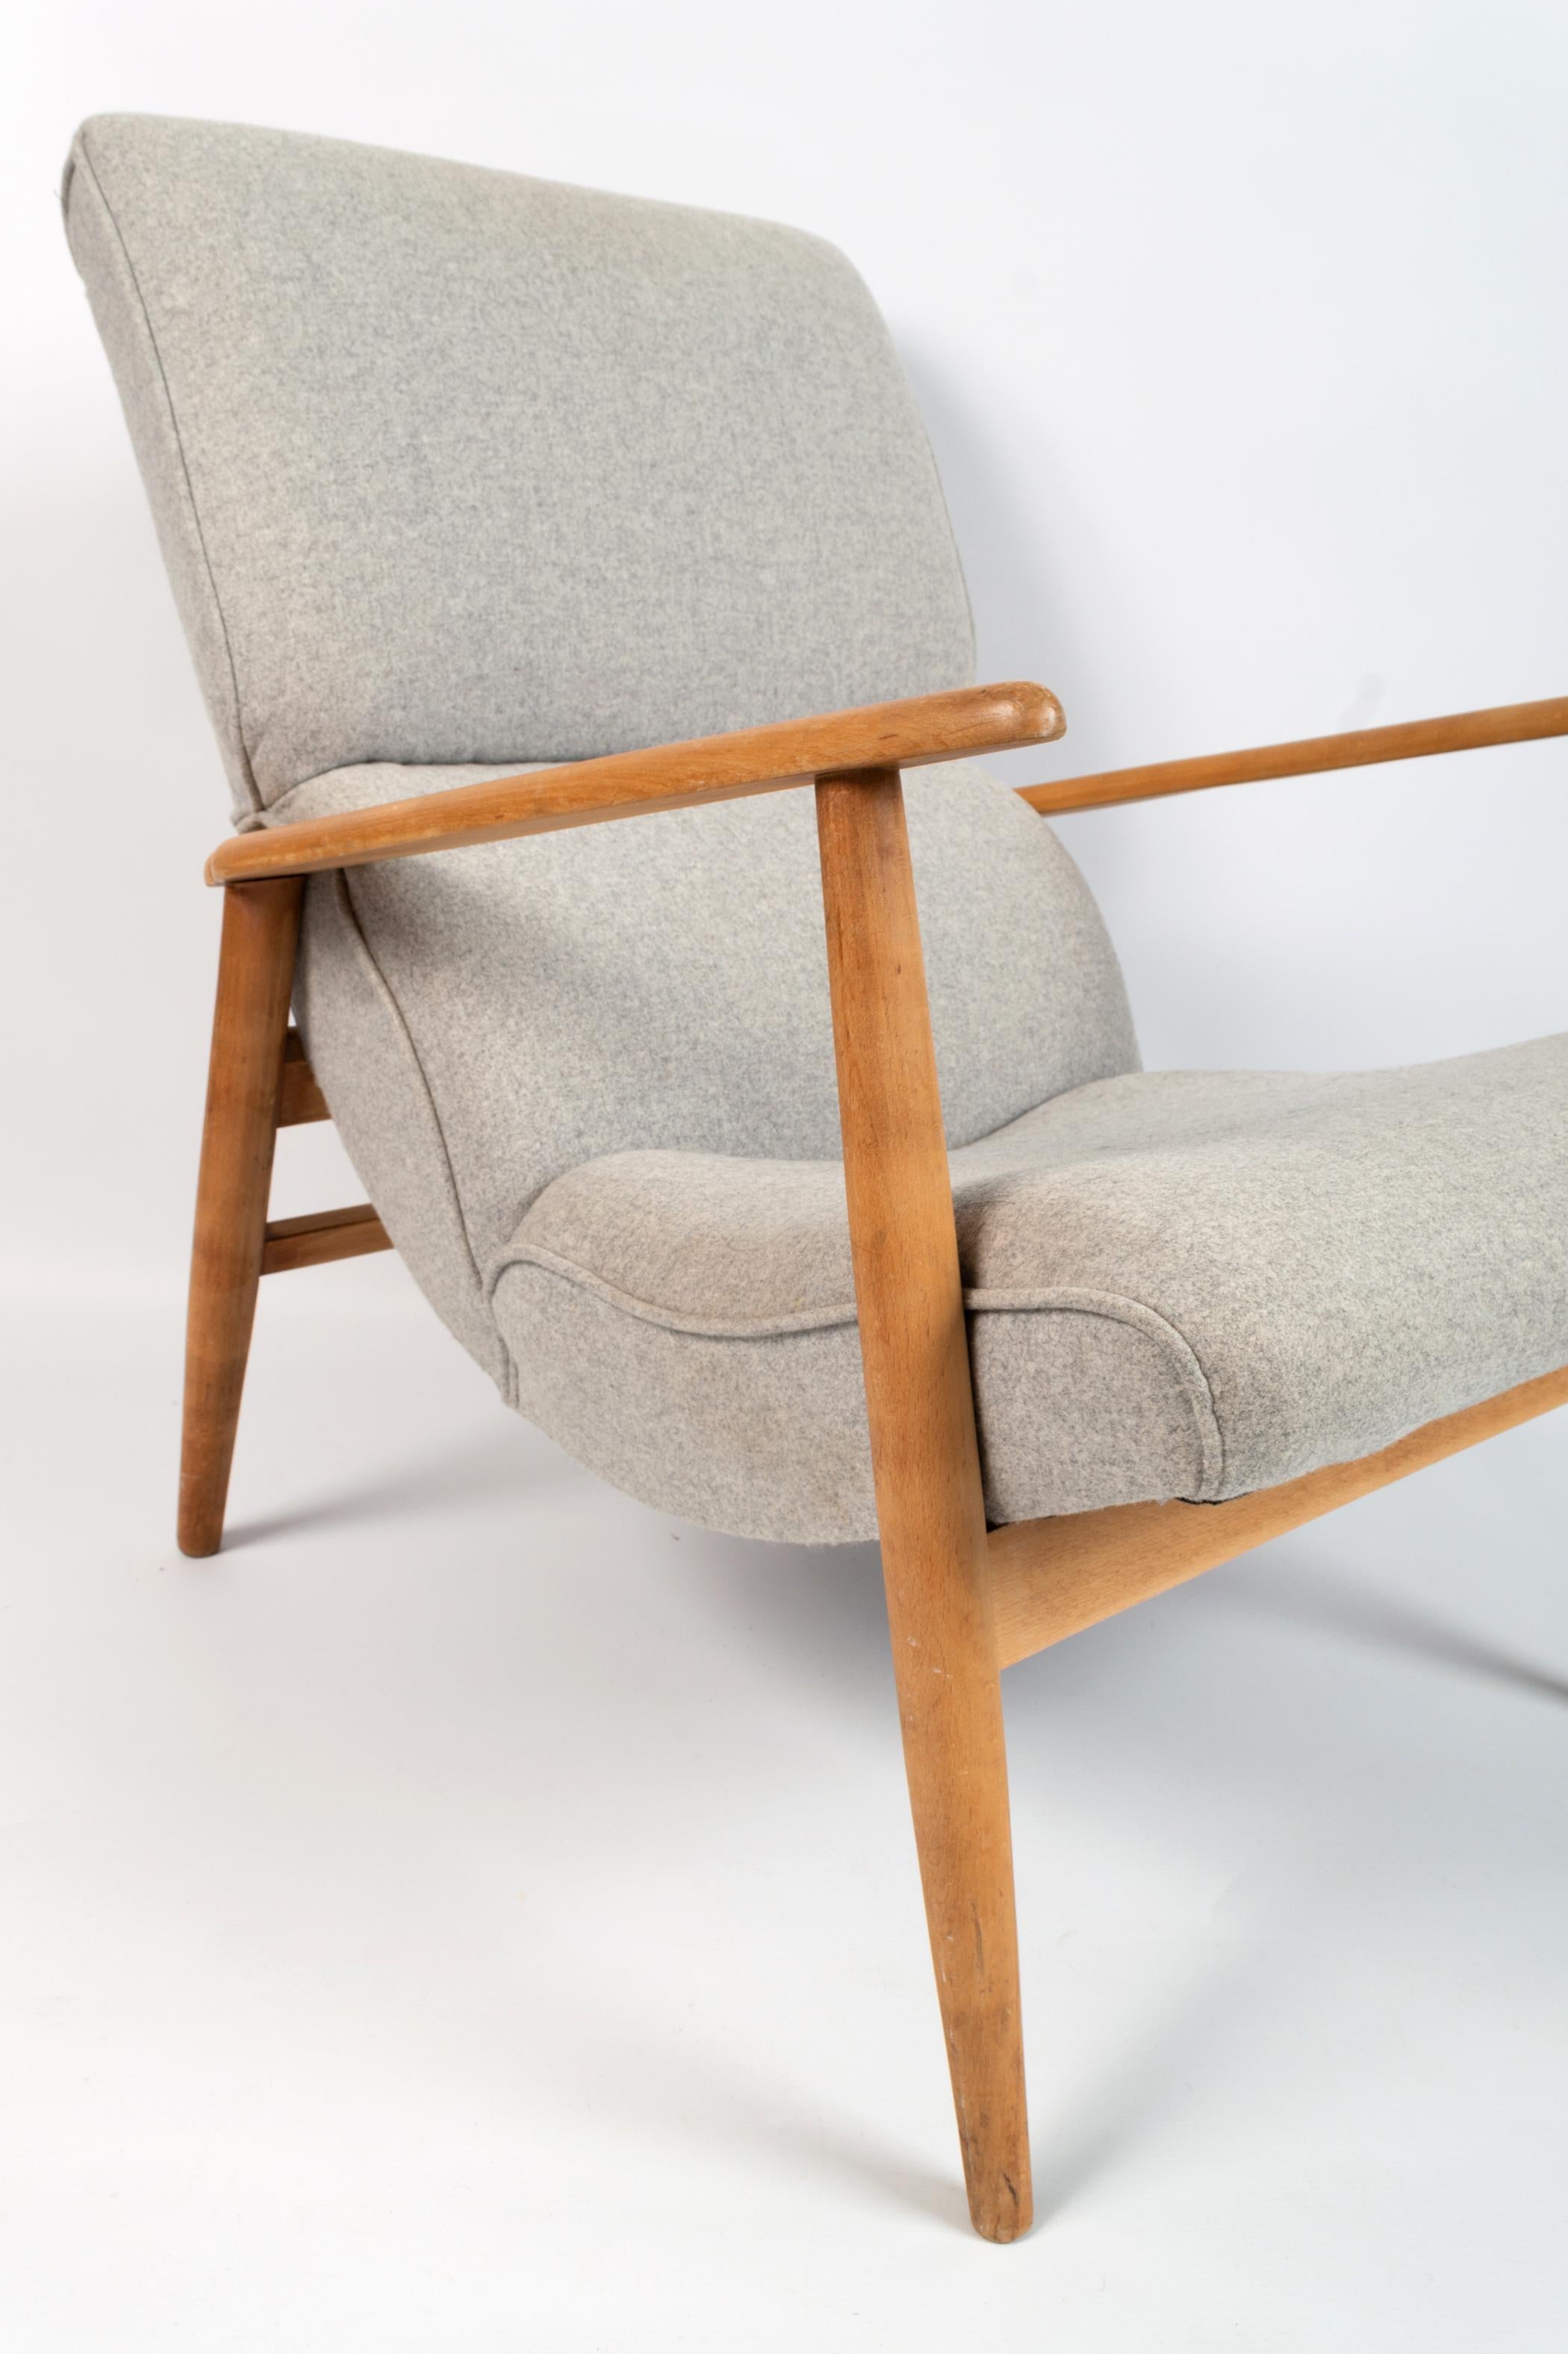 Pair of Mid-Century Danish Lounge Chairs Armchairs Denmark, C.1950 For Sale 1